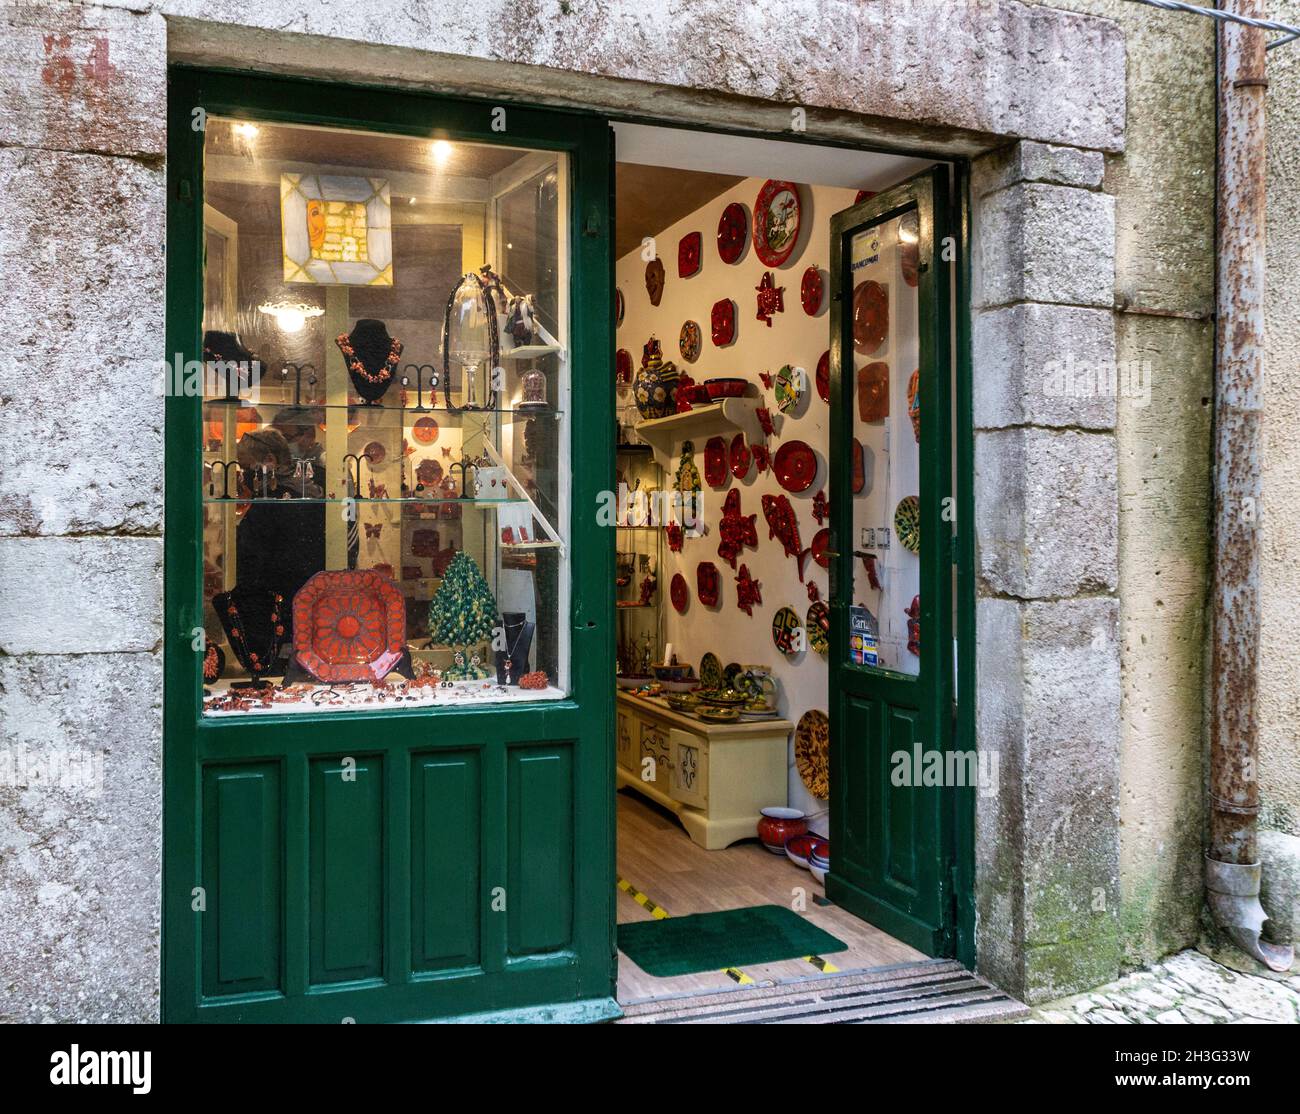 One of the many craft shops that inhabit the narrow streets of Erice in Sicily, Italy. Stock Photo